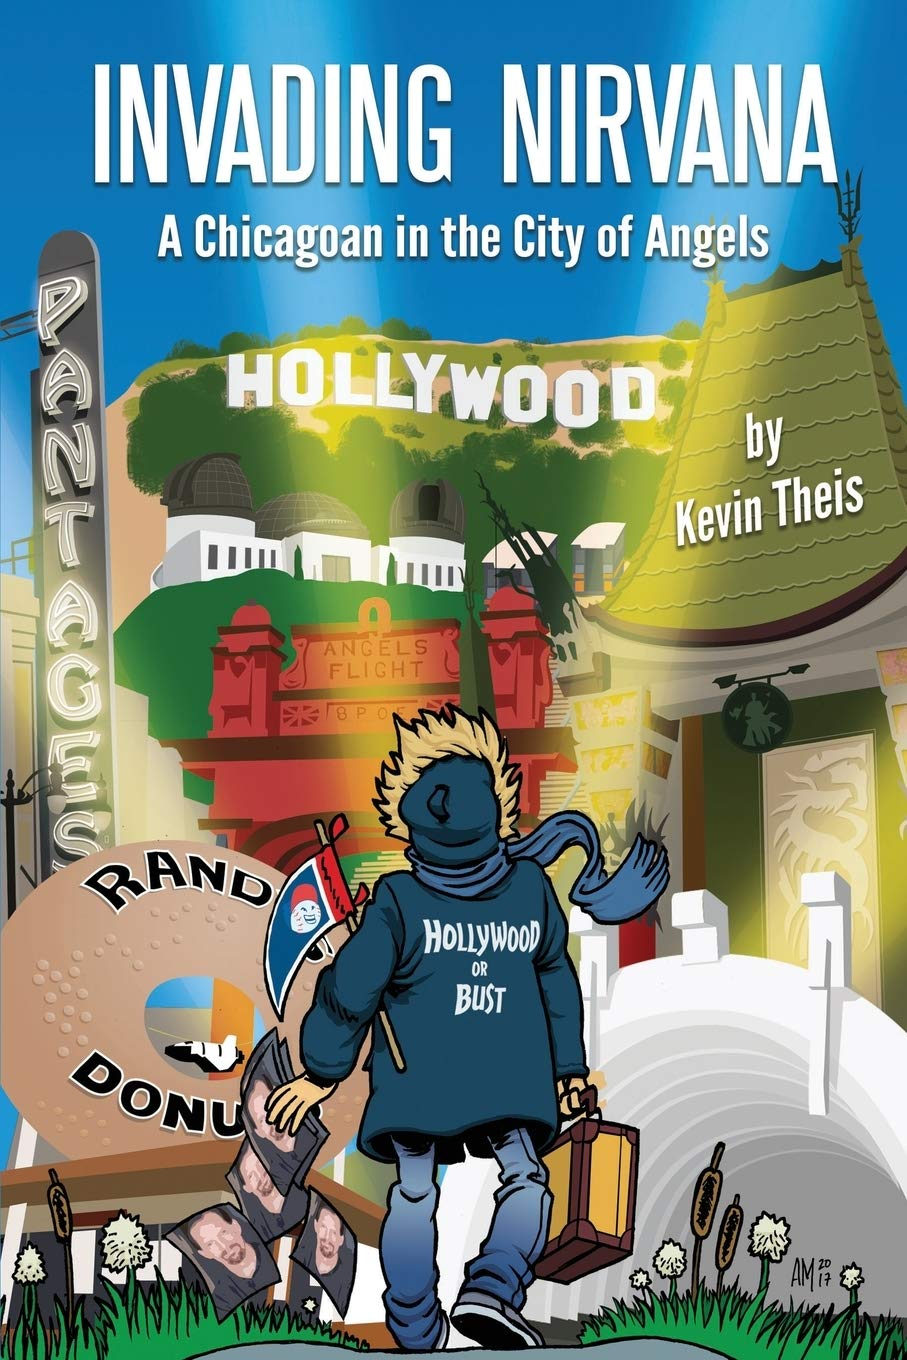 Invading Nirvana – a Chicagoan in the City of Angels by Kevin Theis